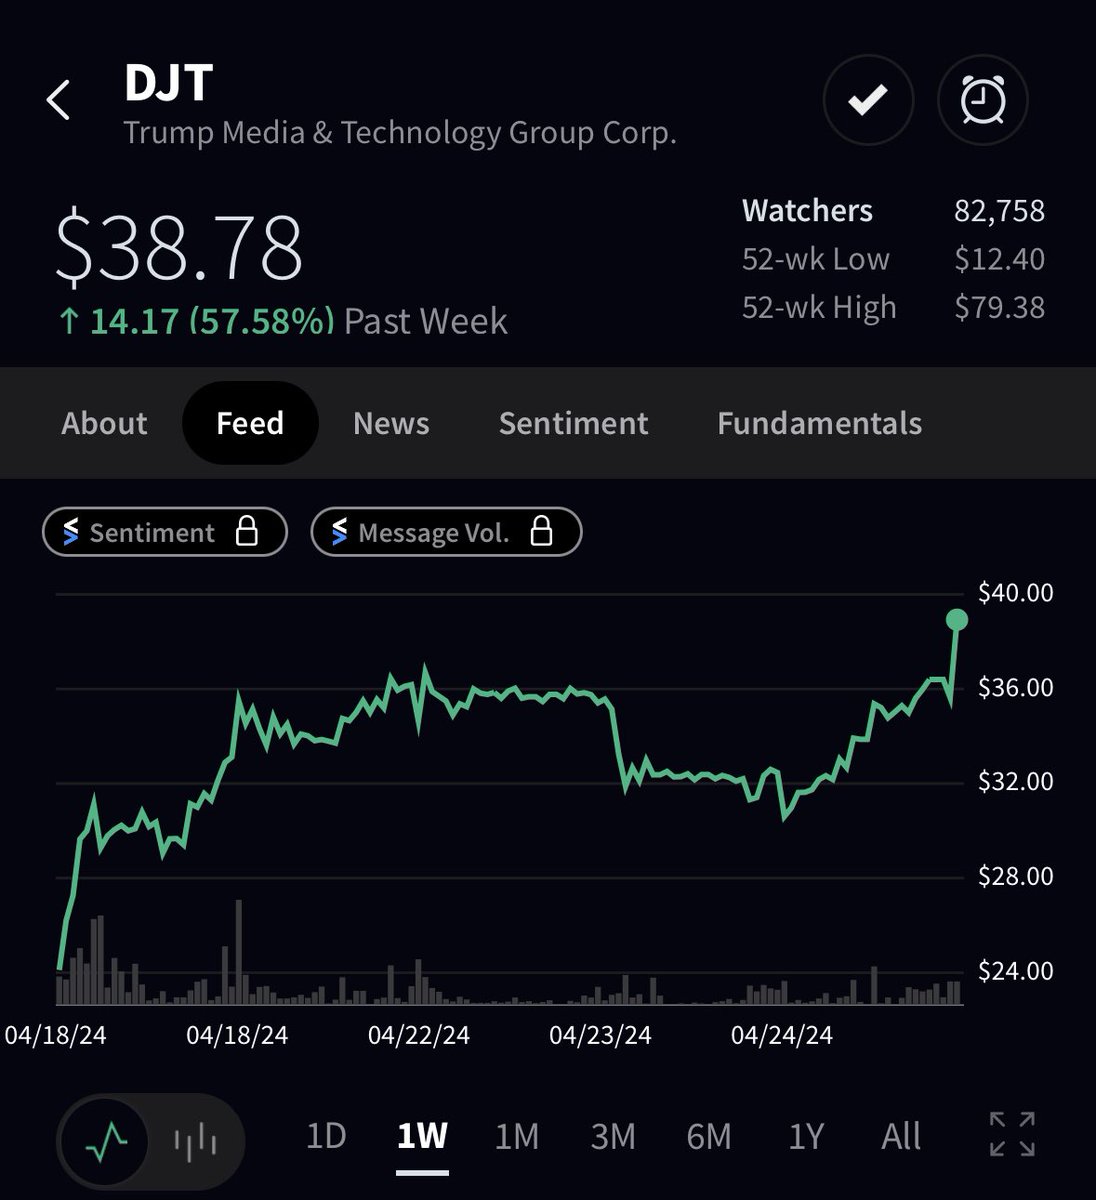 DJT up almost 60% this week, since the CEO addressed short selling manipulation concerns and contacted the congress in a letter to get trading reports from DTCC, Finra, Market makers and broker dealers.
The Market is rigged against retail investors